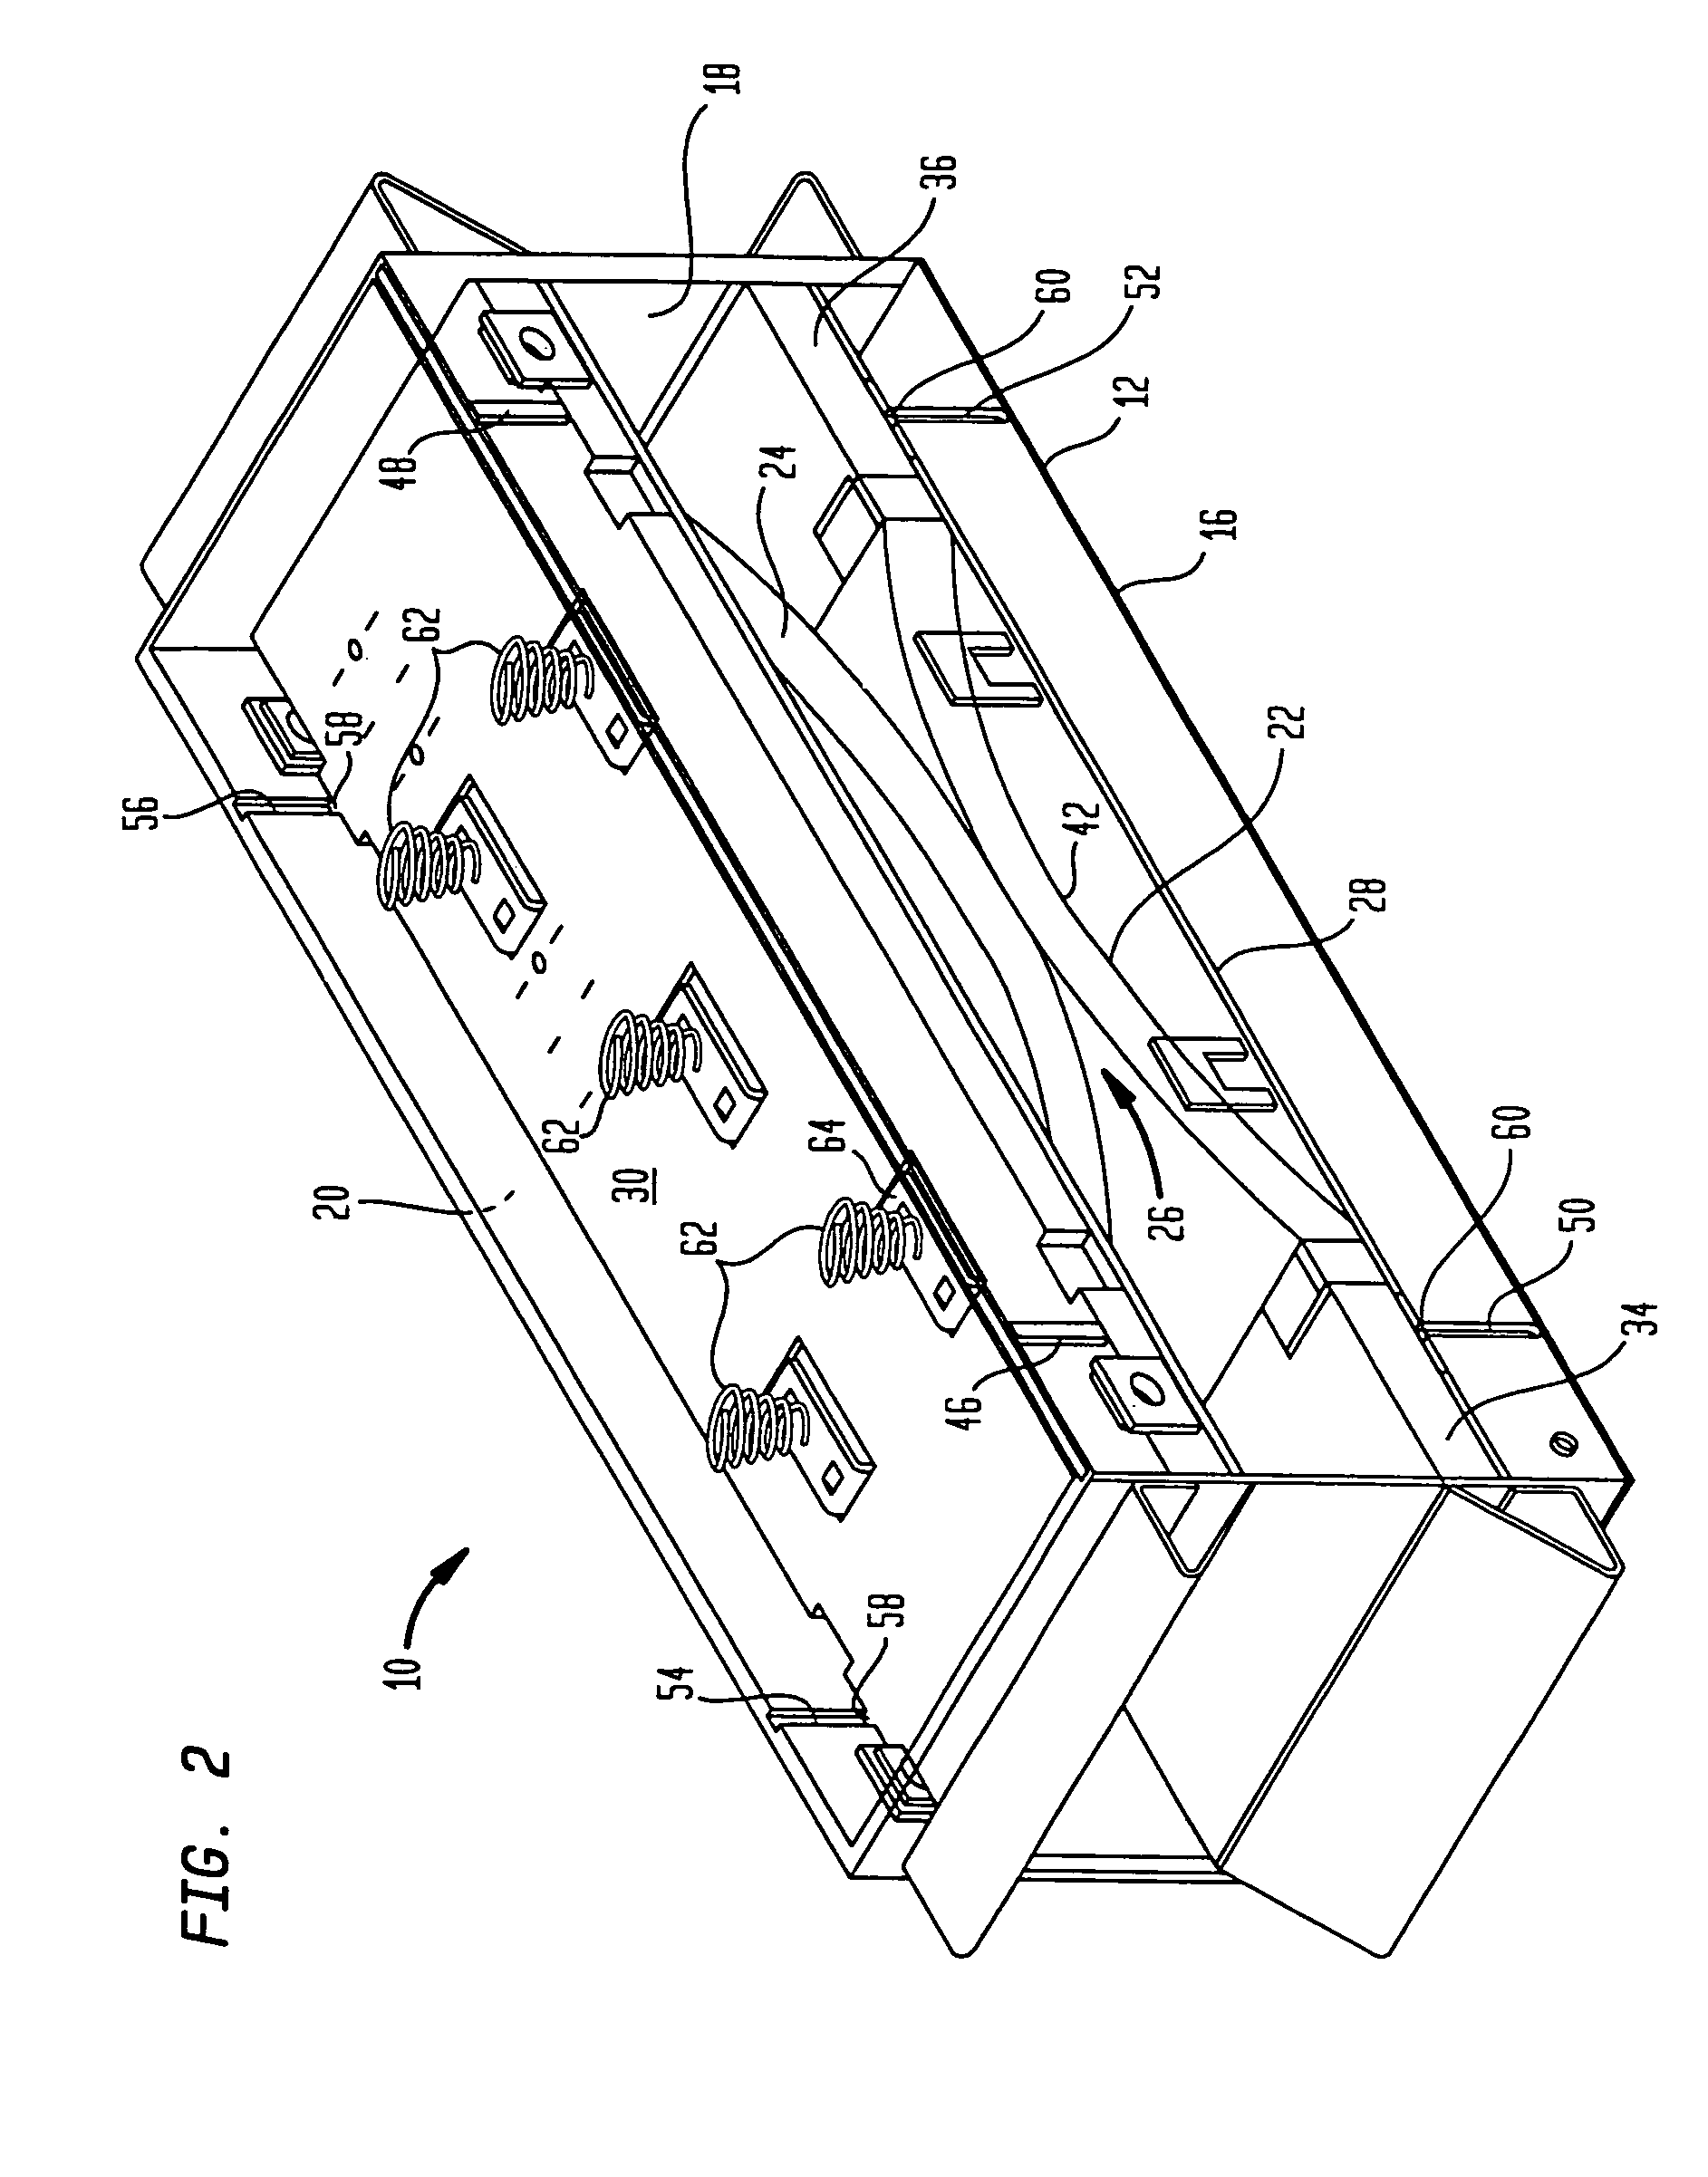 Intumescent firestopping apparatus and method